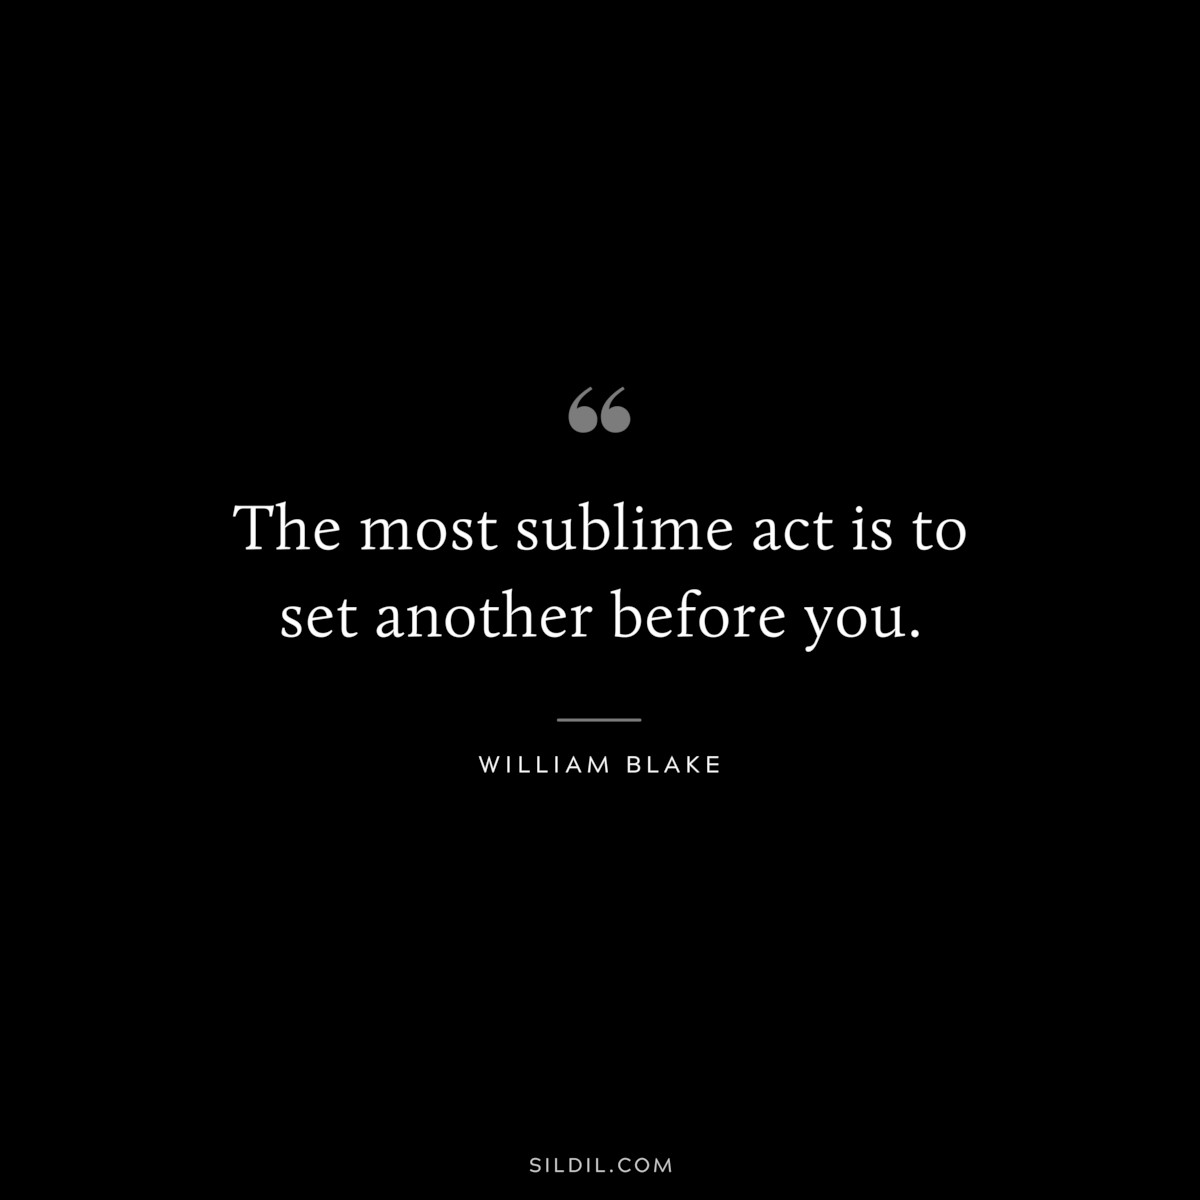 The most sublime act is to set another before you. ― William Blake